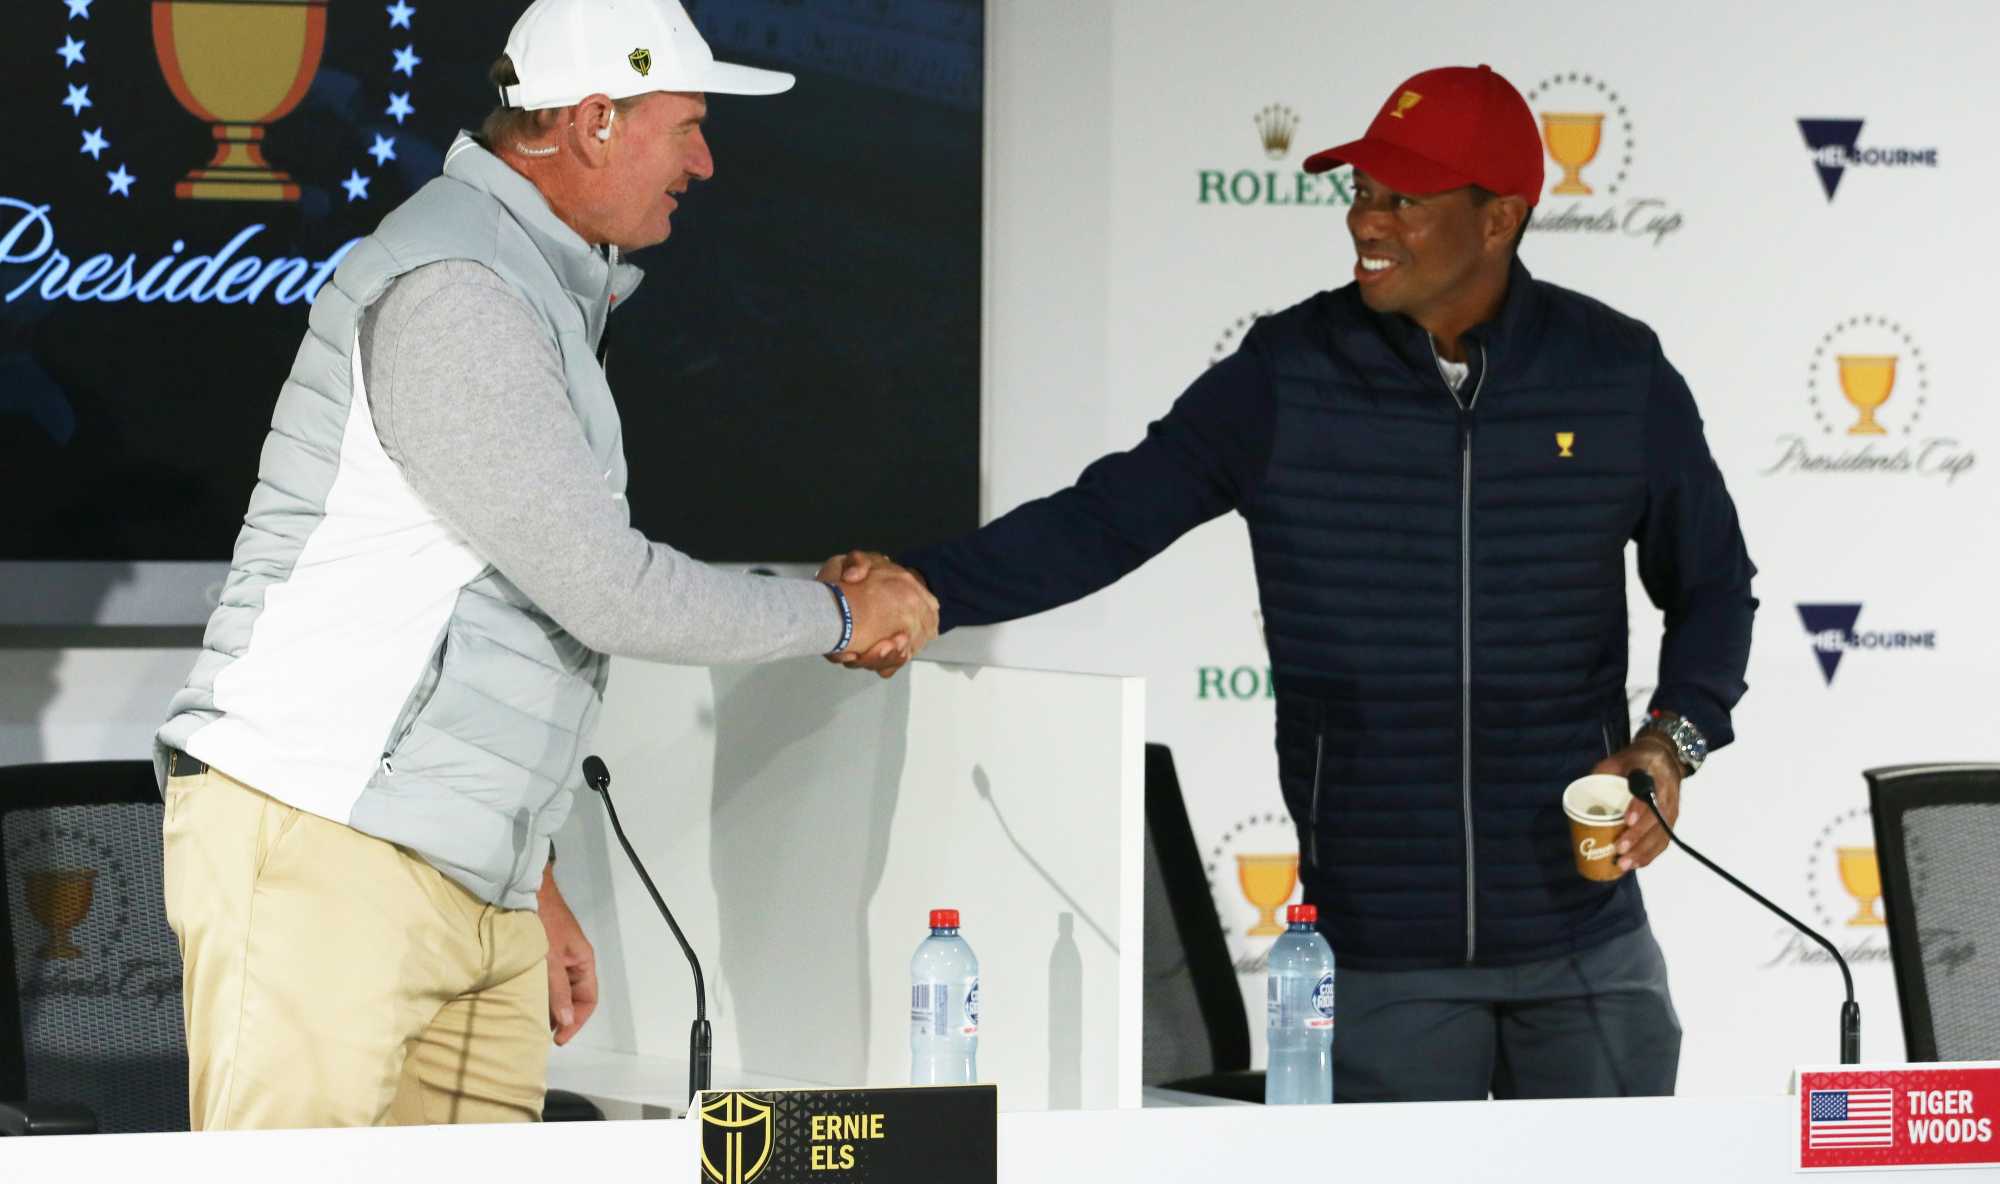 Ernie Els and Tiger Woods during the press conference at the 2019 Presidents Cup.